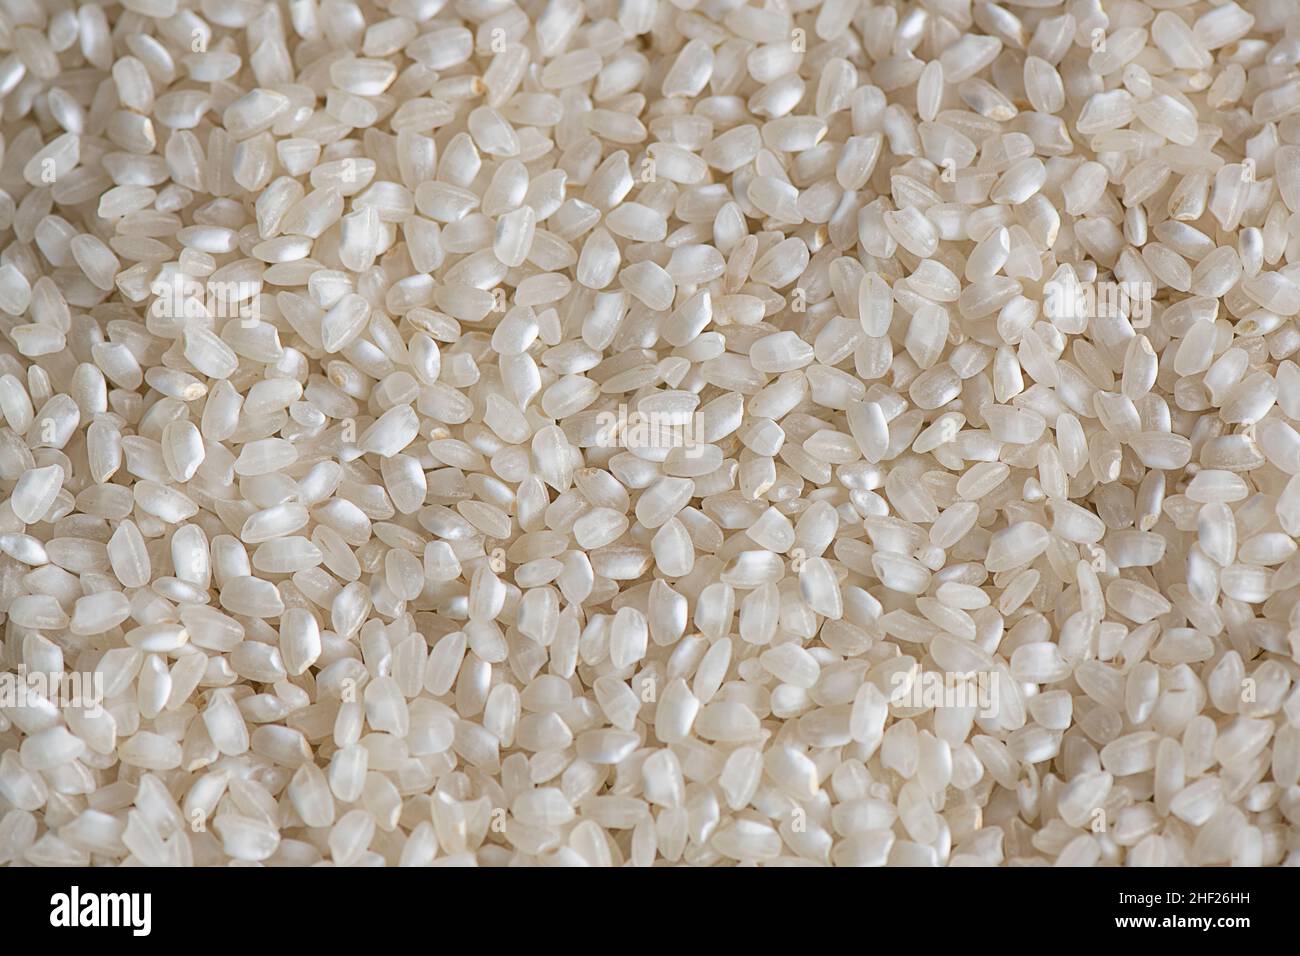 Small and round short-grained white rice laid flat, dry and fresh ...